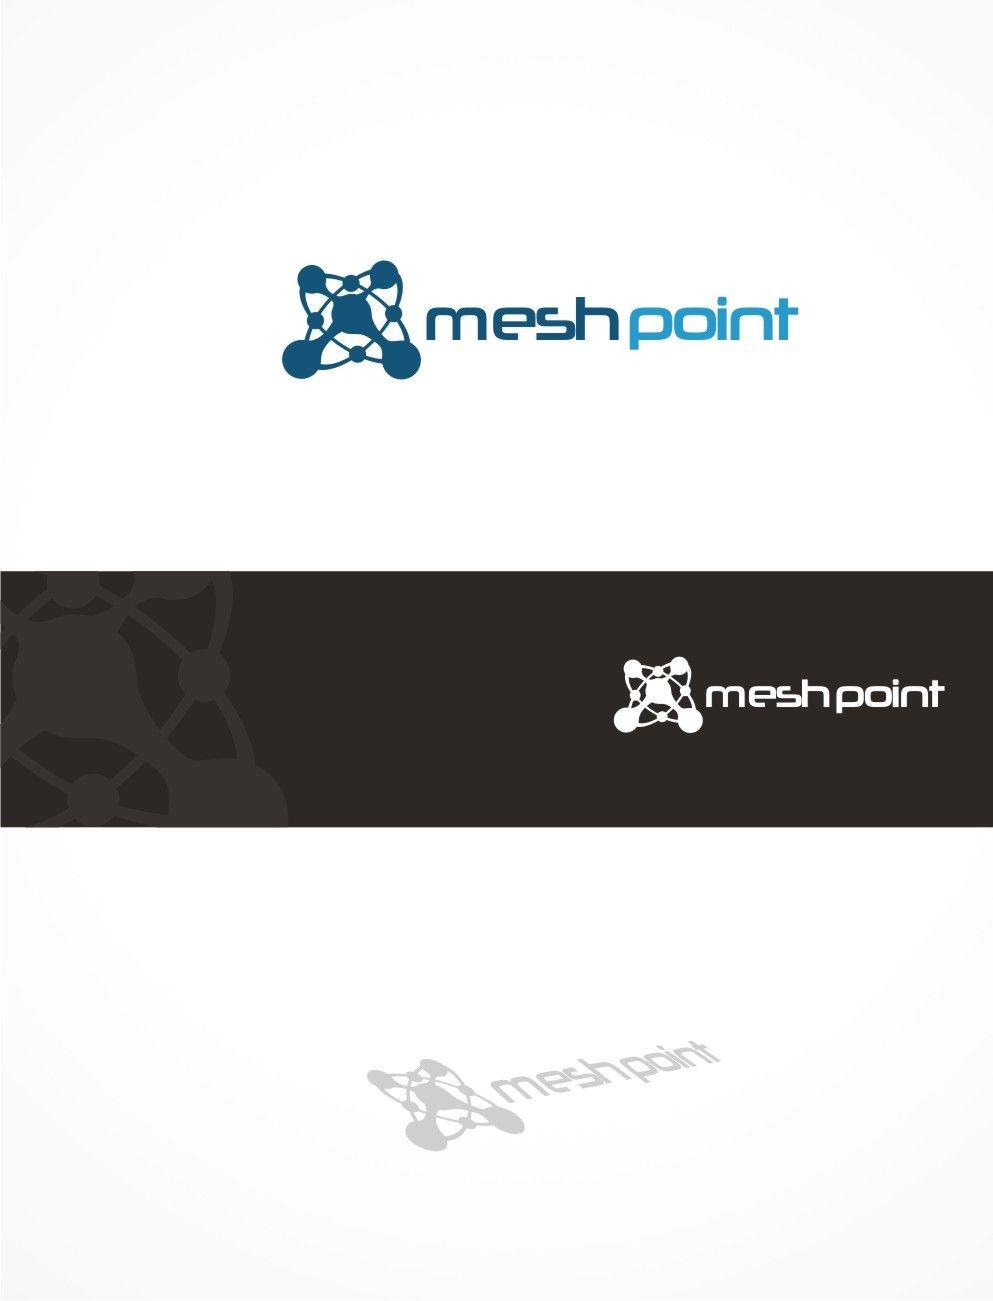 Gray Company Logo - It Company Logo Design for mesh point by gray mind. Design